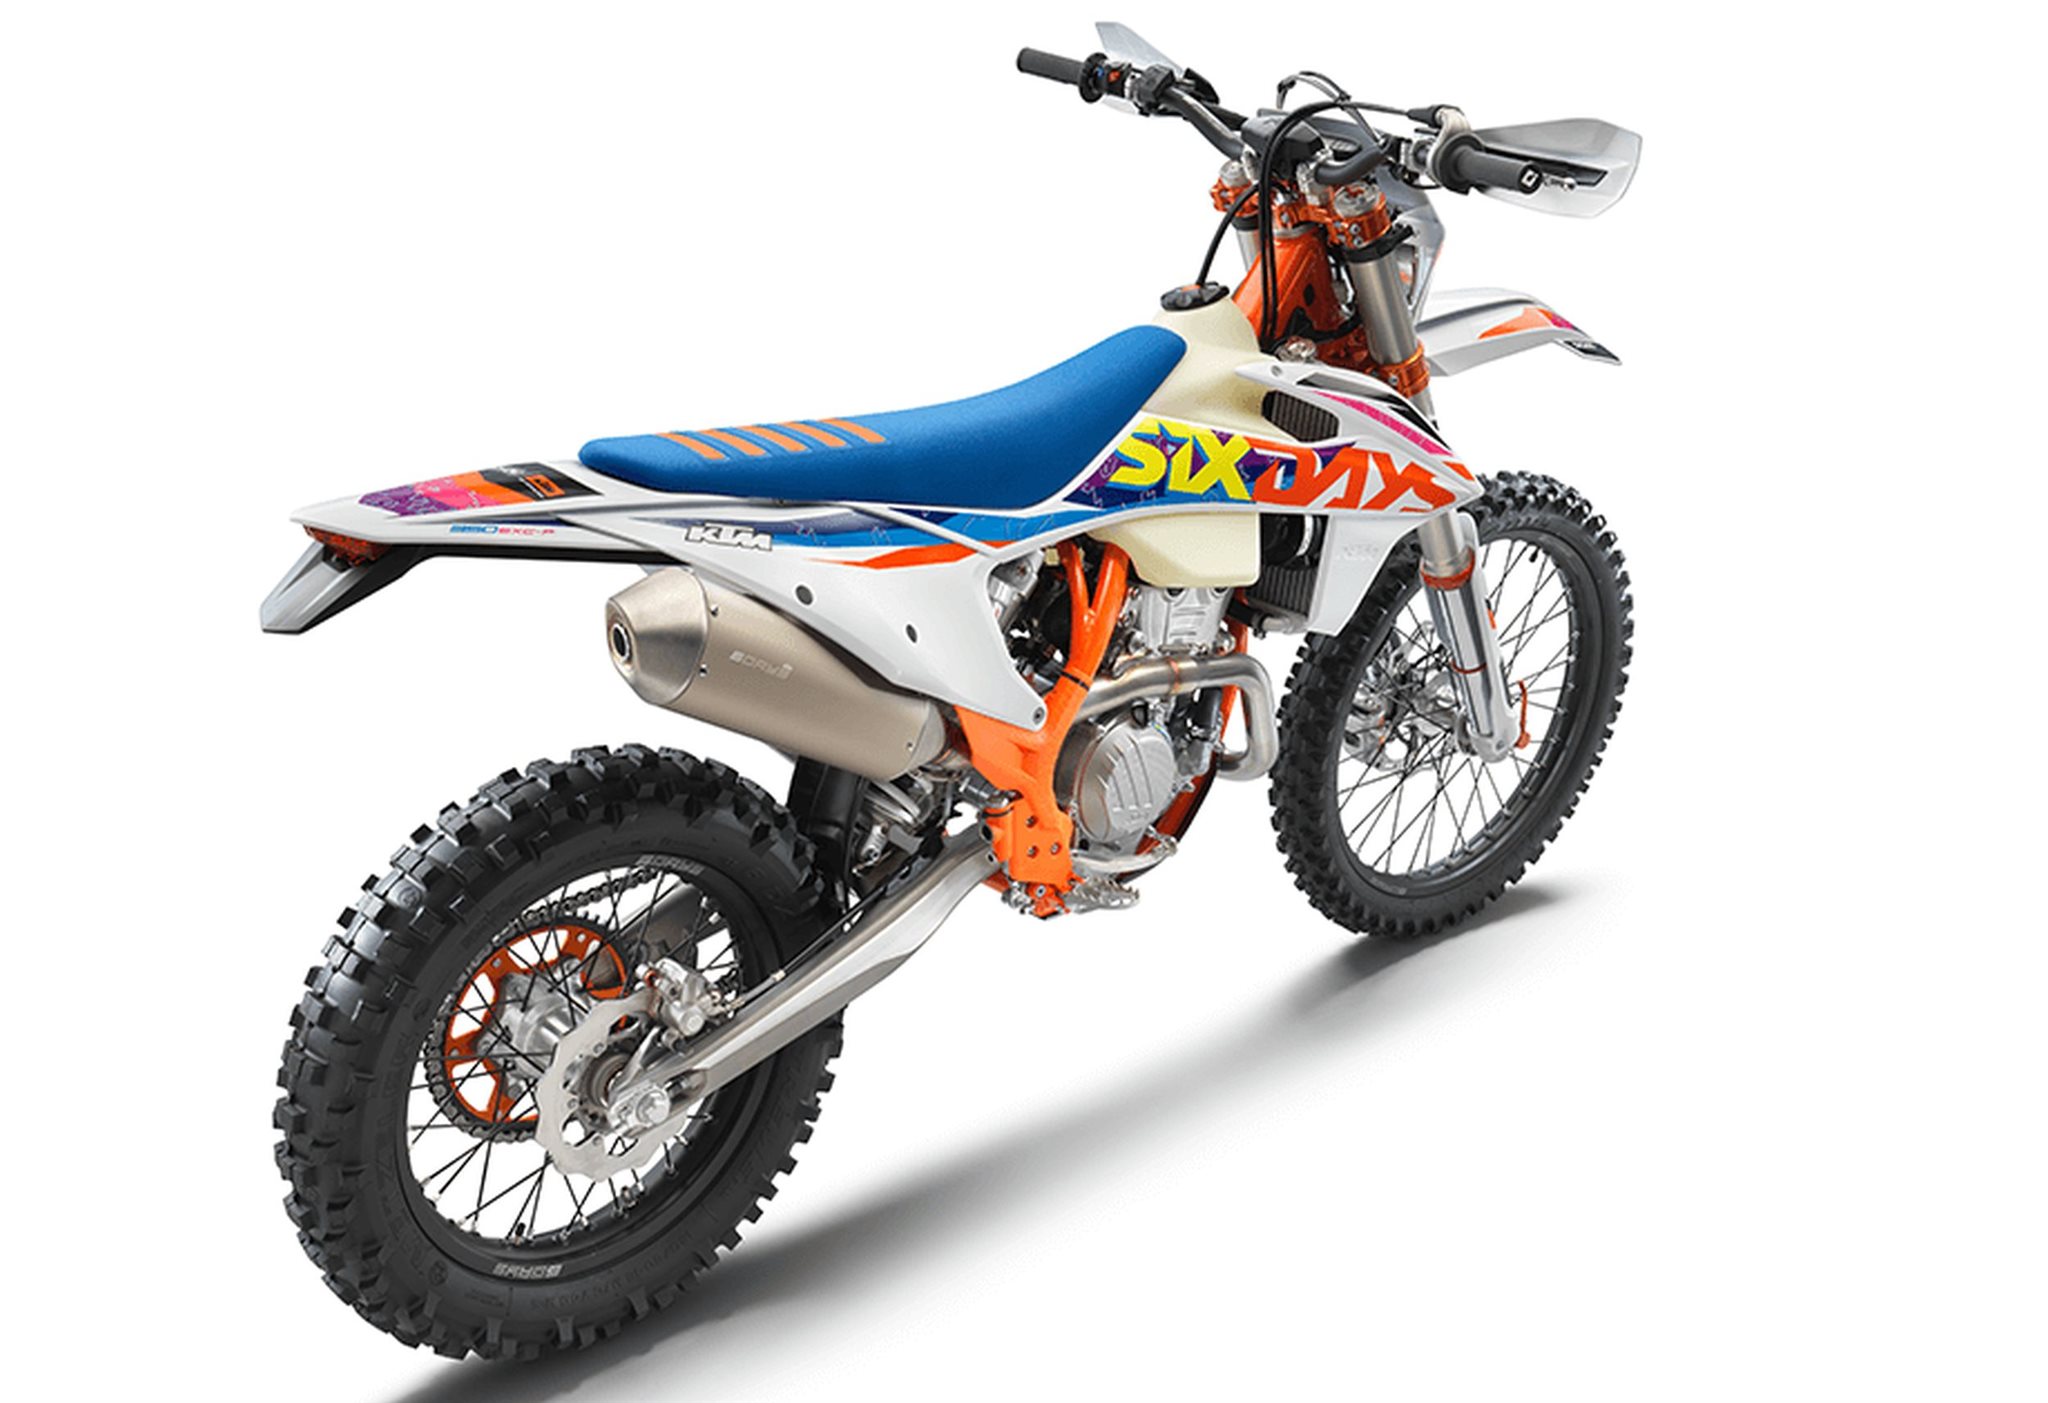 2022 KTM 350 XC-F Guide • Total Motorcycle